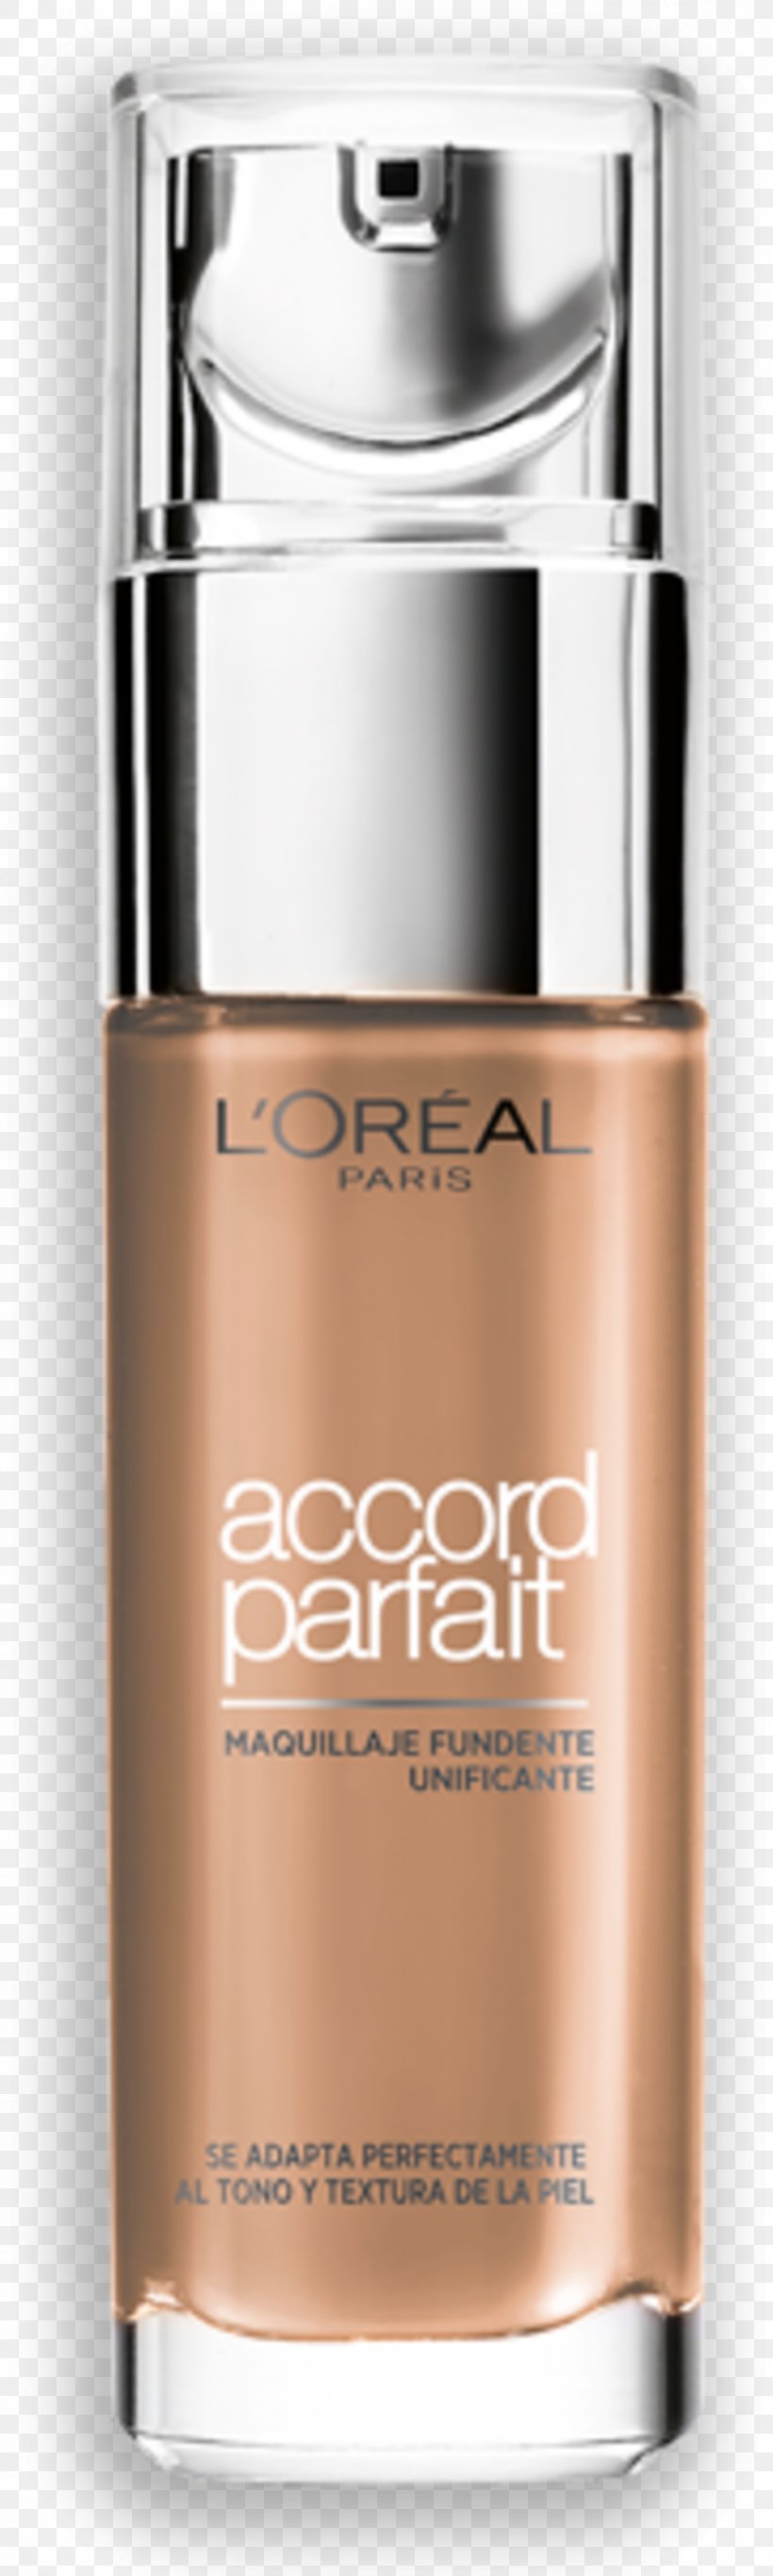 L'Oréal True Match Foundation Make-up Cosmetics Accord Parfait, PNG, 1009x3361px, Foundation, Beauty, Color, Concealer, Cosmetics Download Free